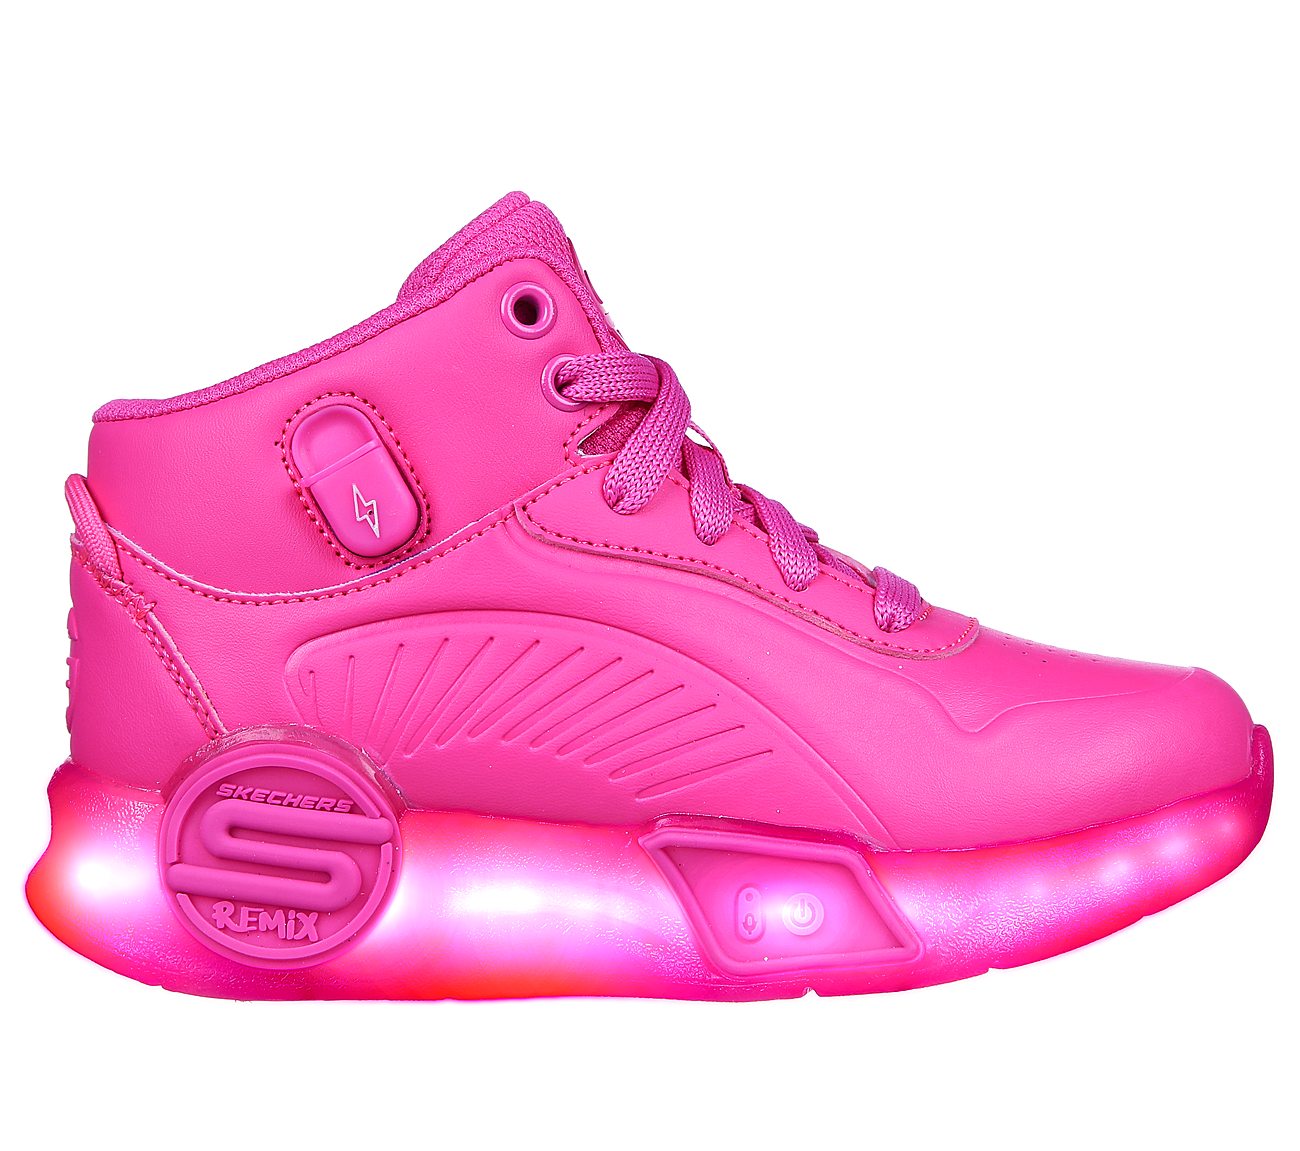 S-LIGHTS REMIX, HHOT PINK Footwear Right View